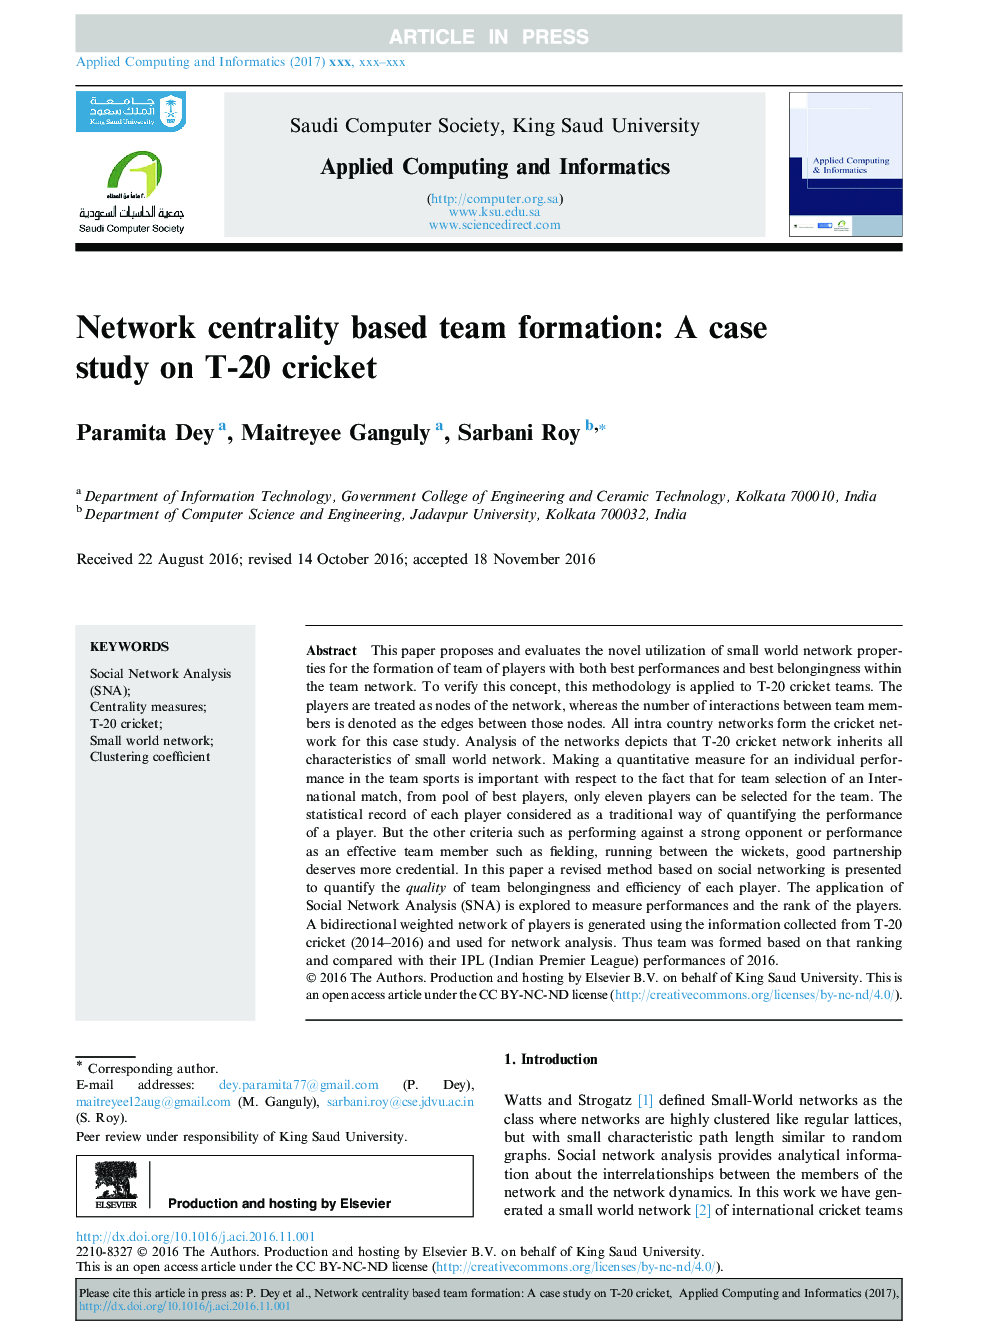 Network centrality based team formation: A case study on T-20 cricket